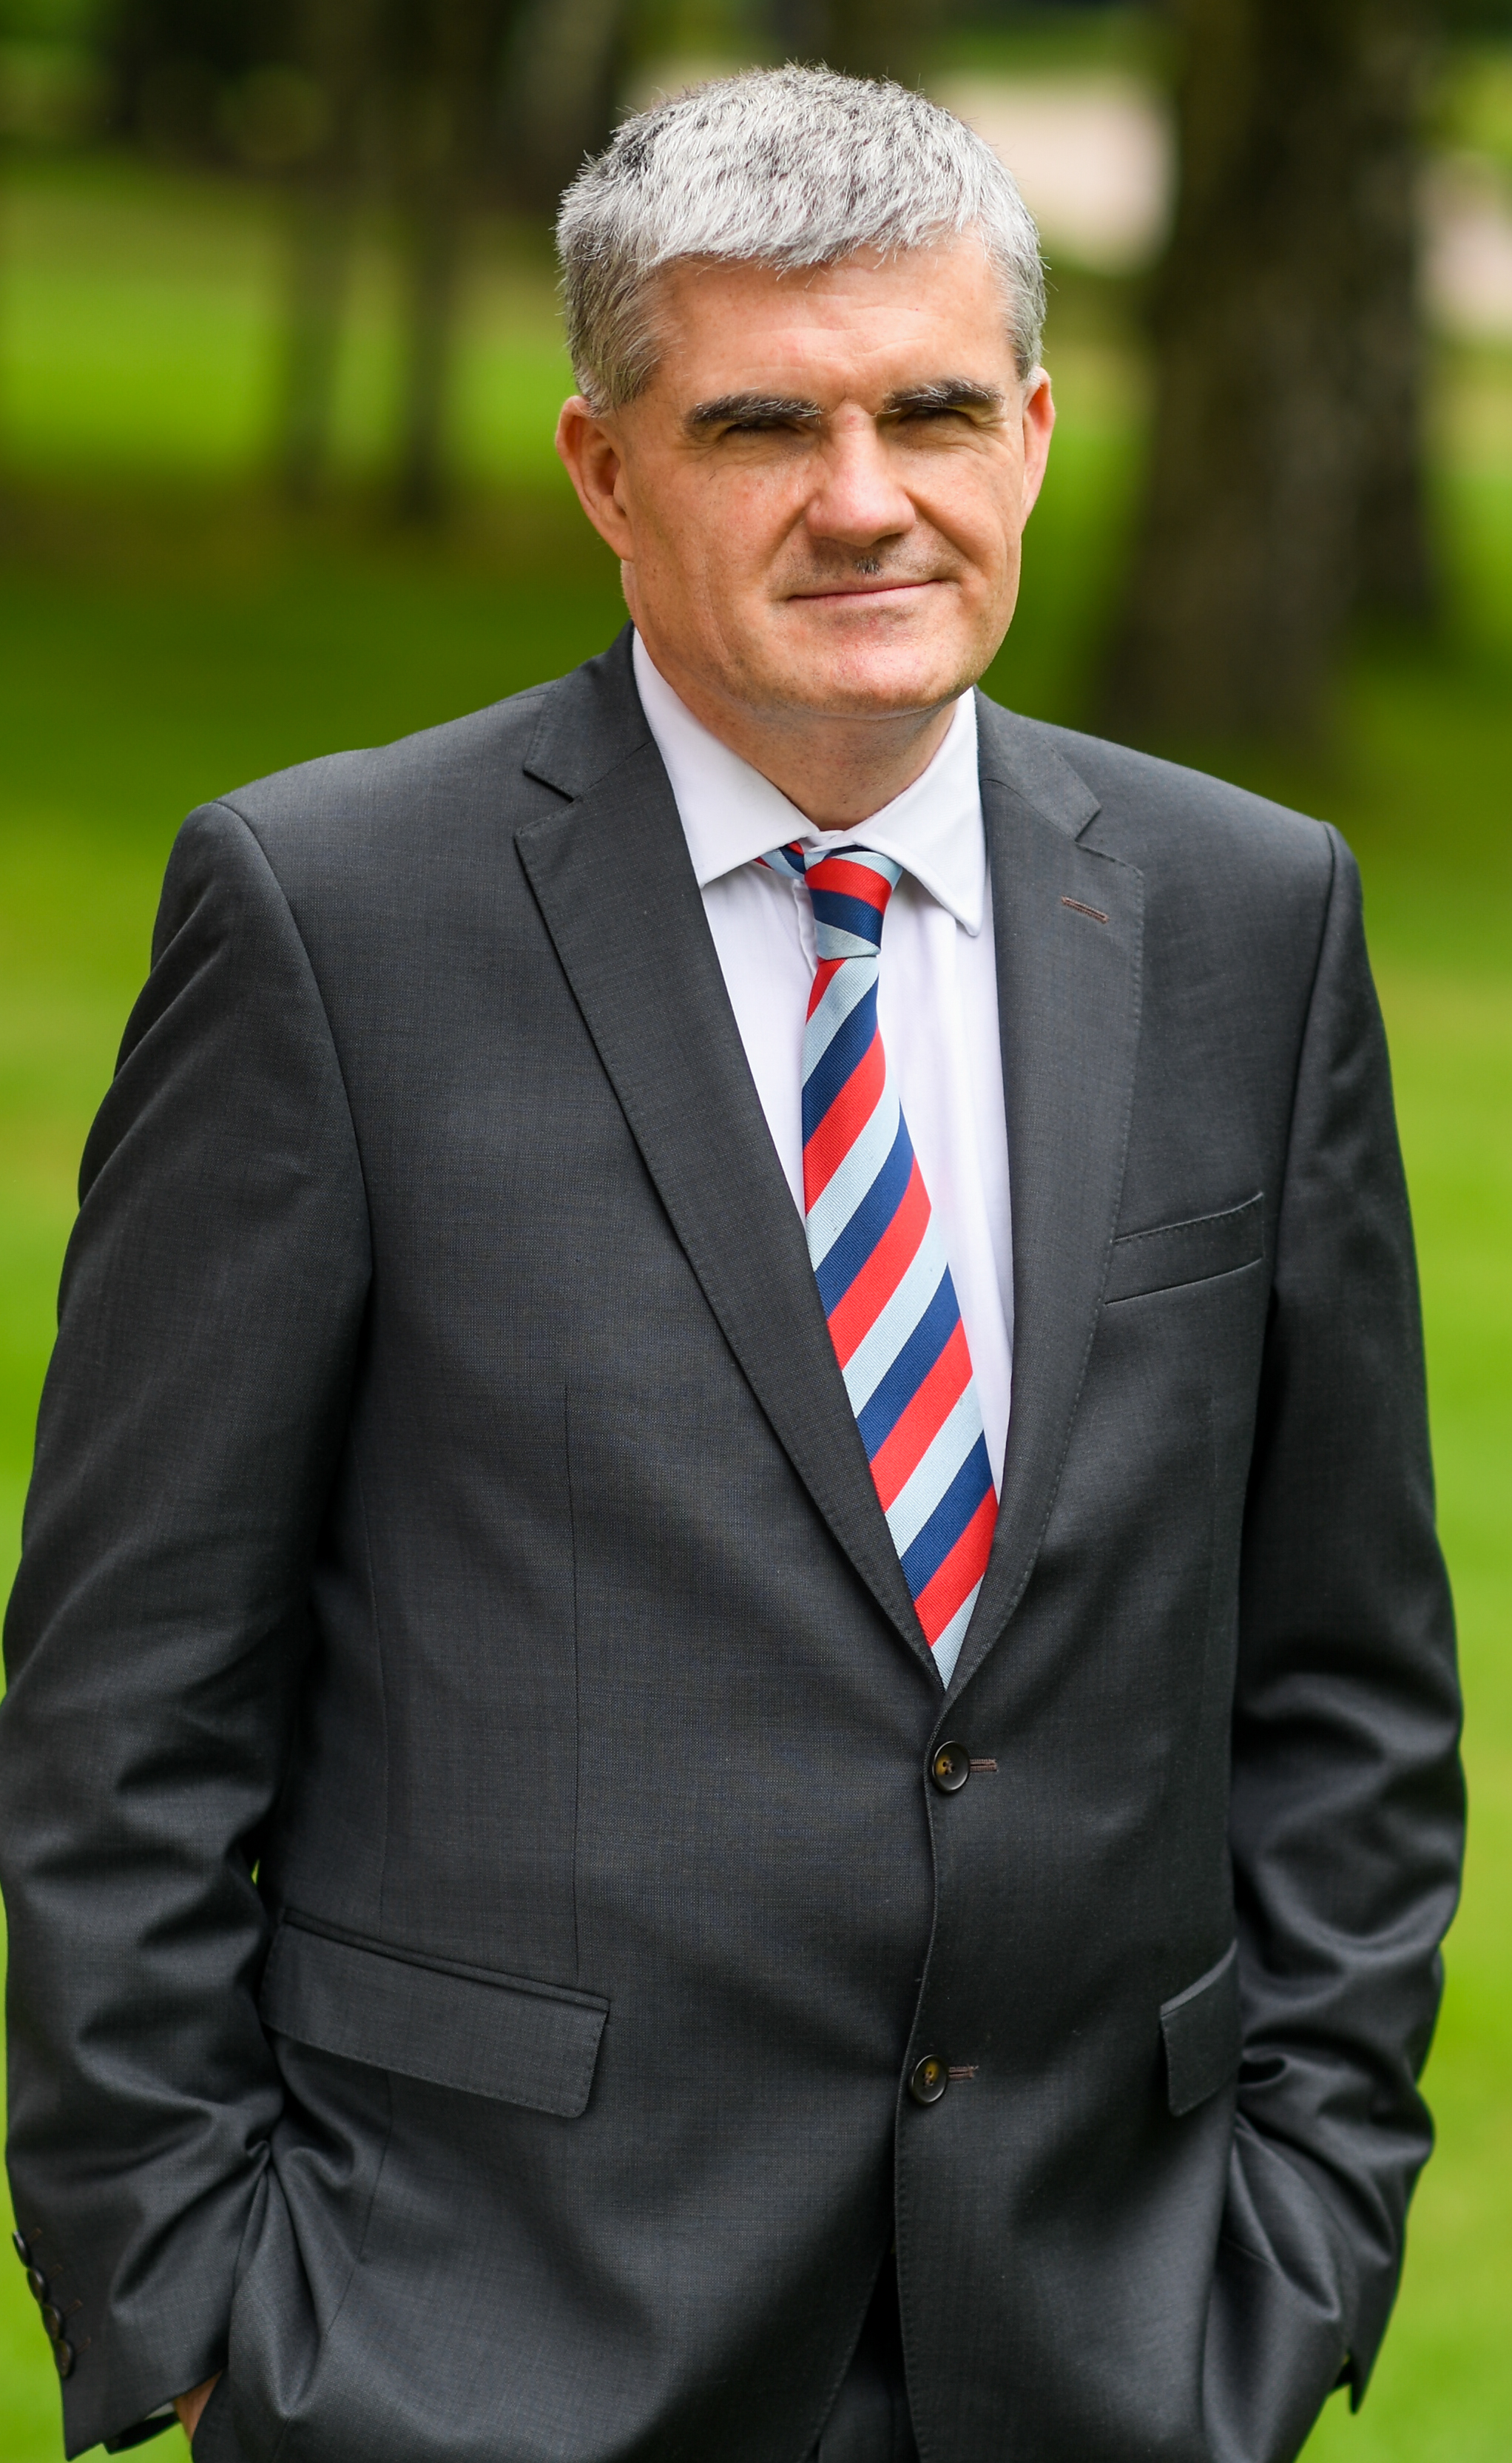 Neil Heslop OBE